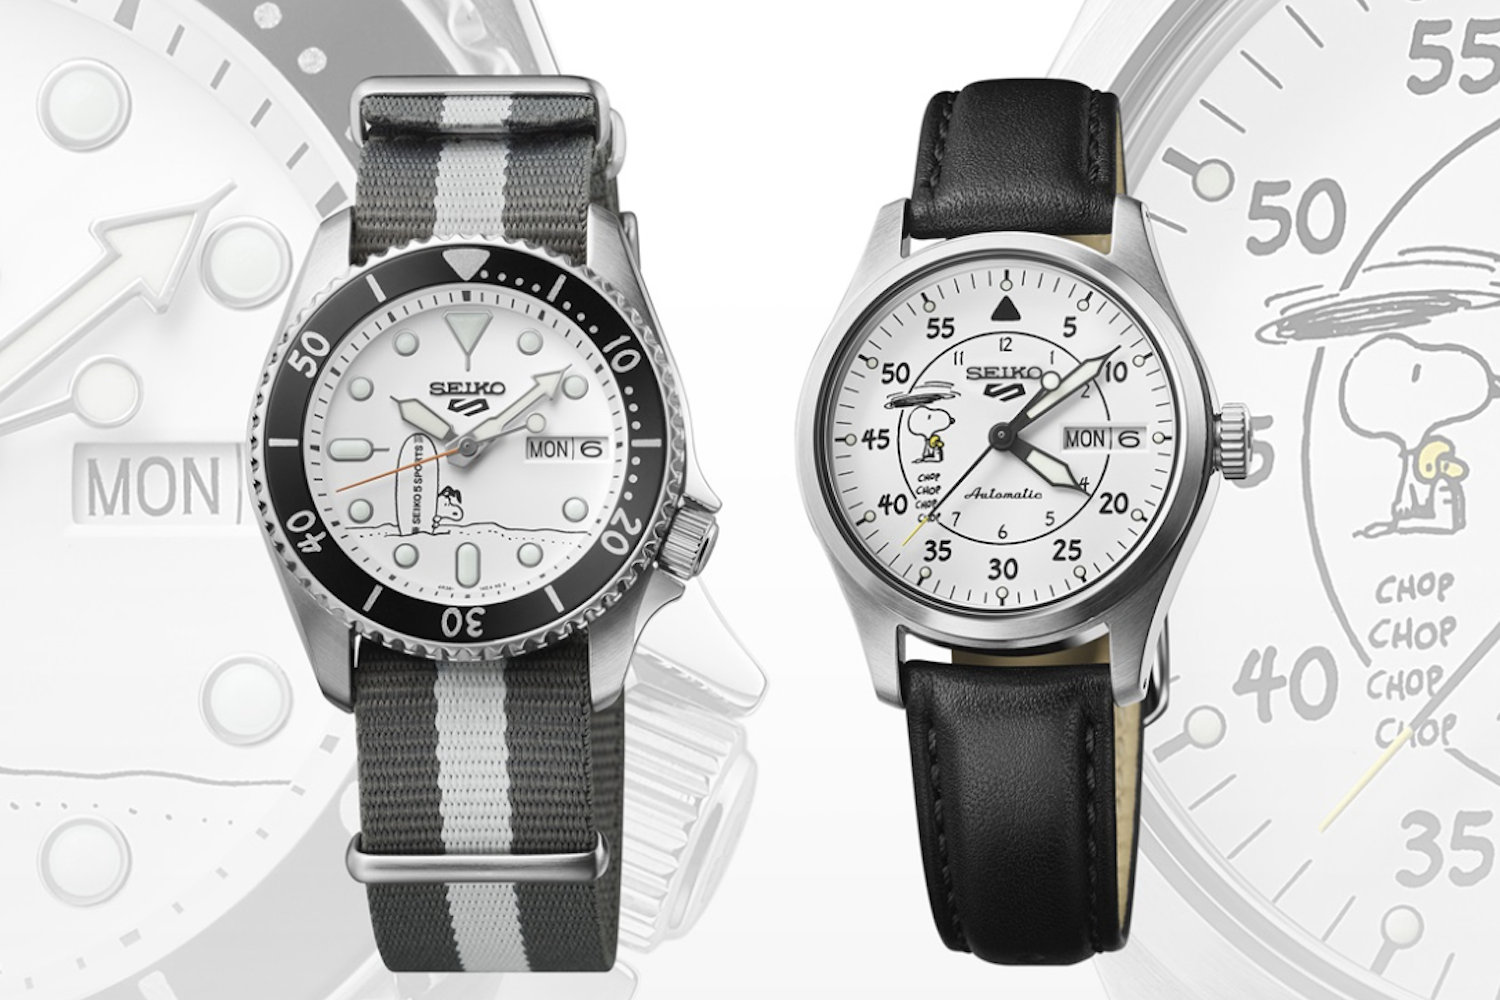 two snoopy watches from the Seiko 5 Sports 55th Anniversary Peanuts Editions collection